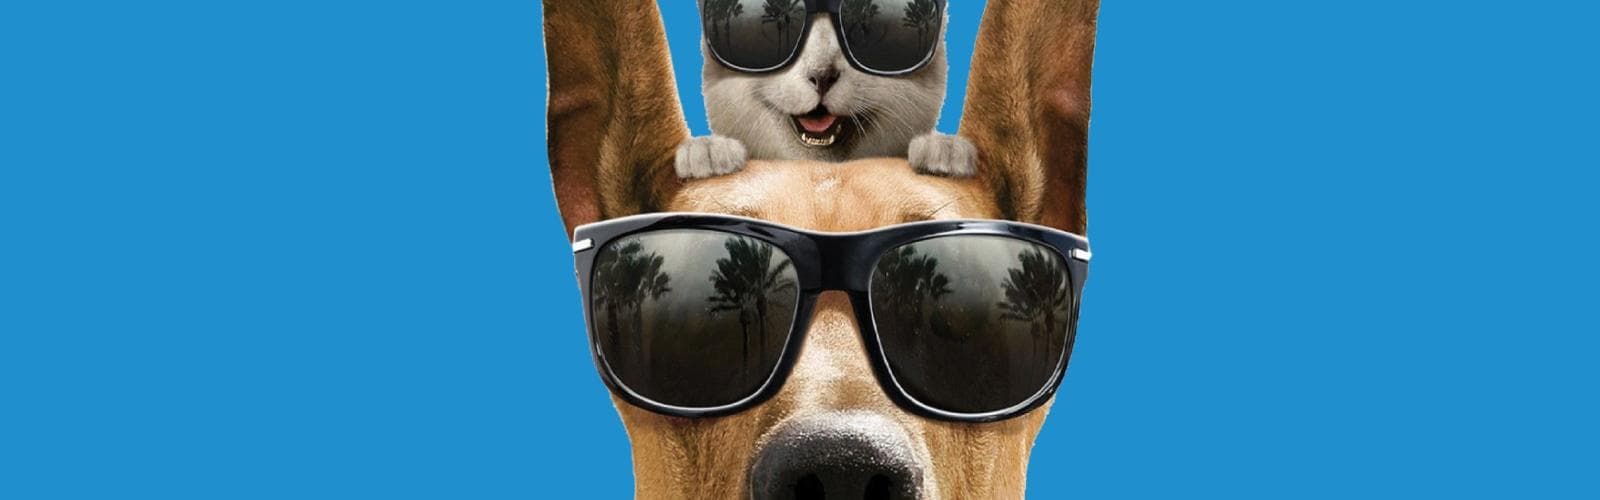 Dog and cat wearing sunglasses